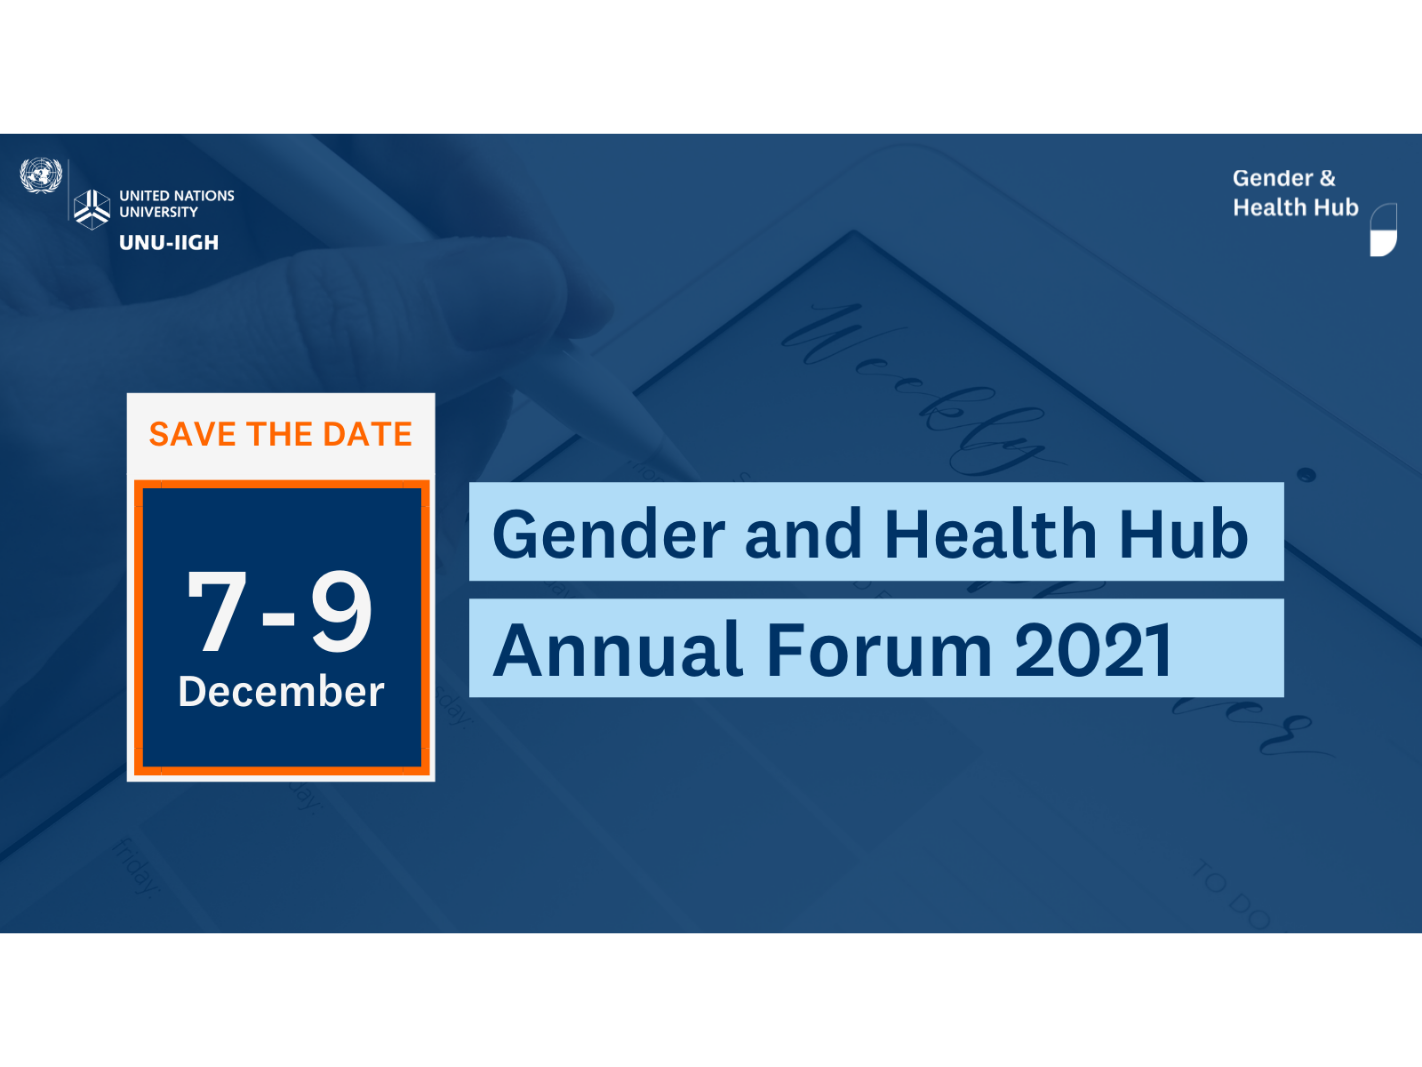 Gender and Health Hub Annual Forum